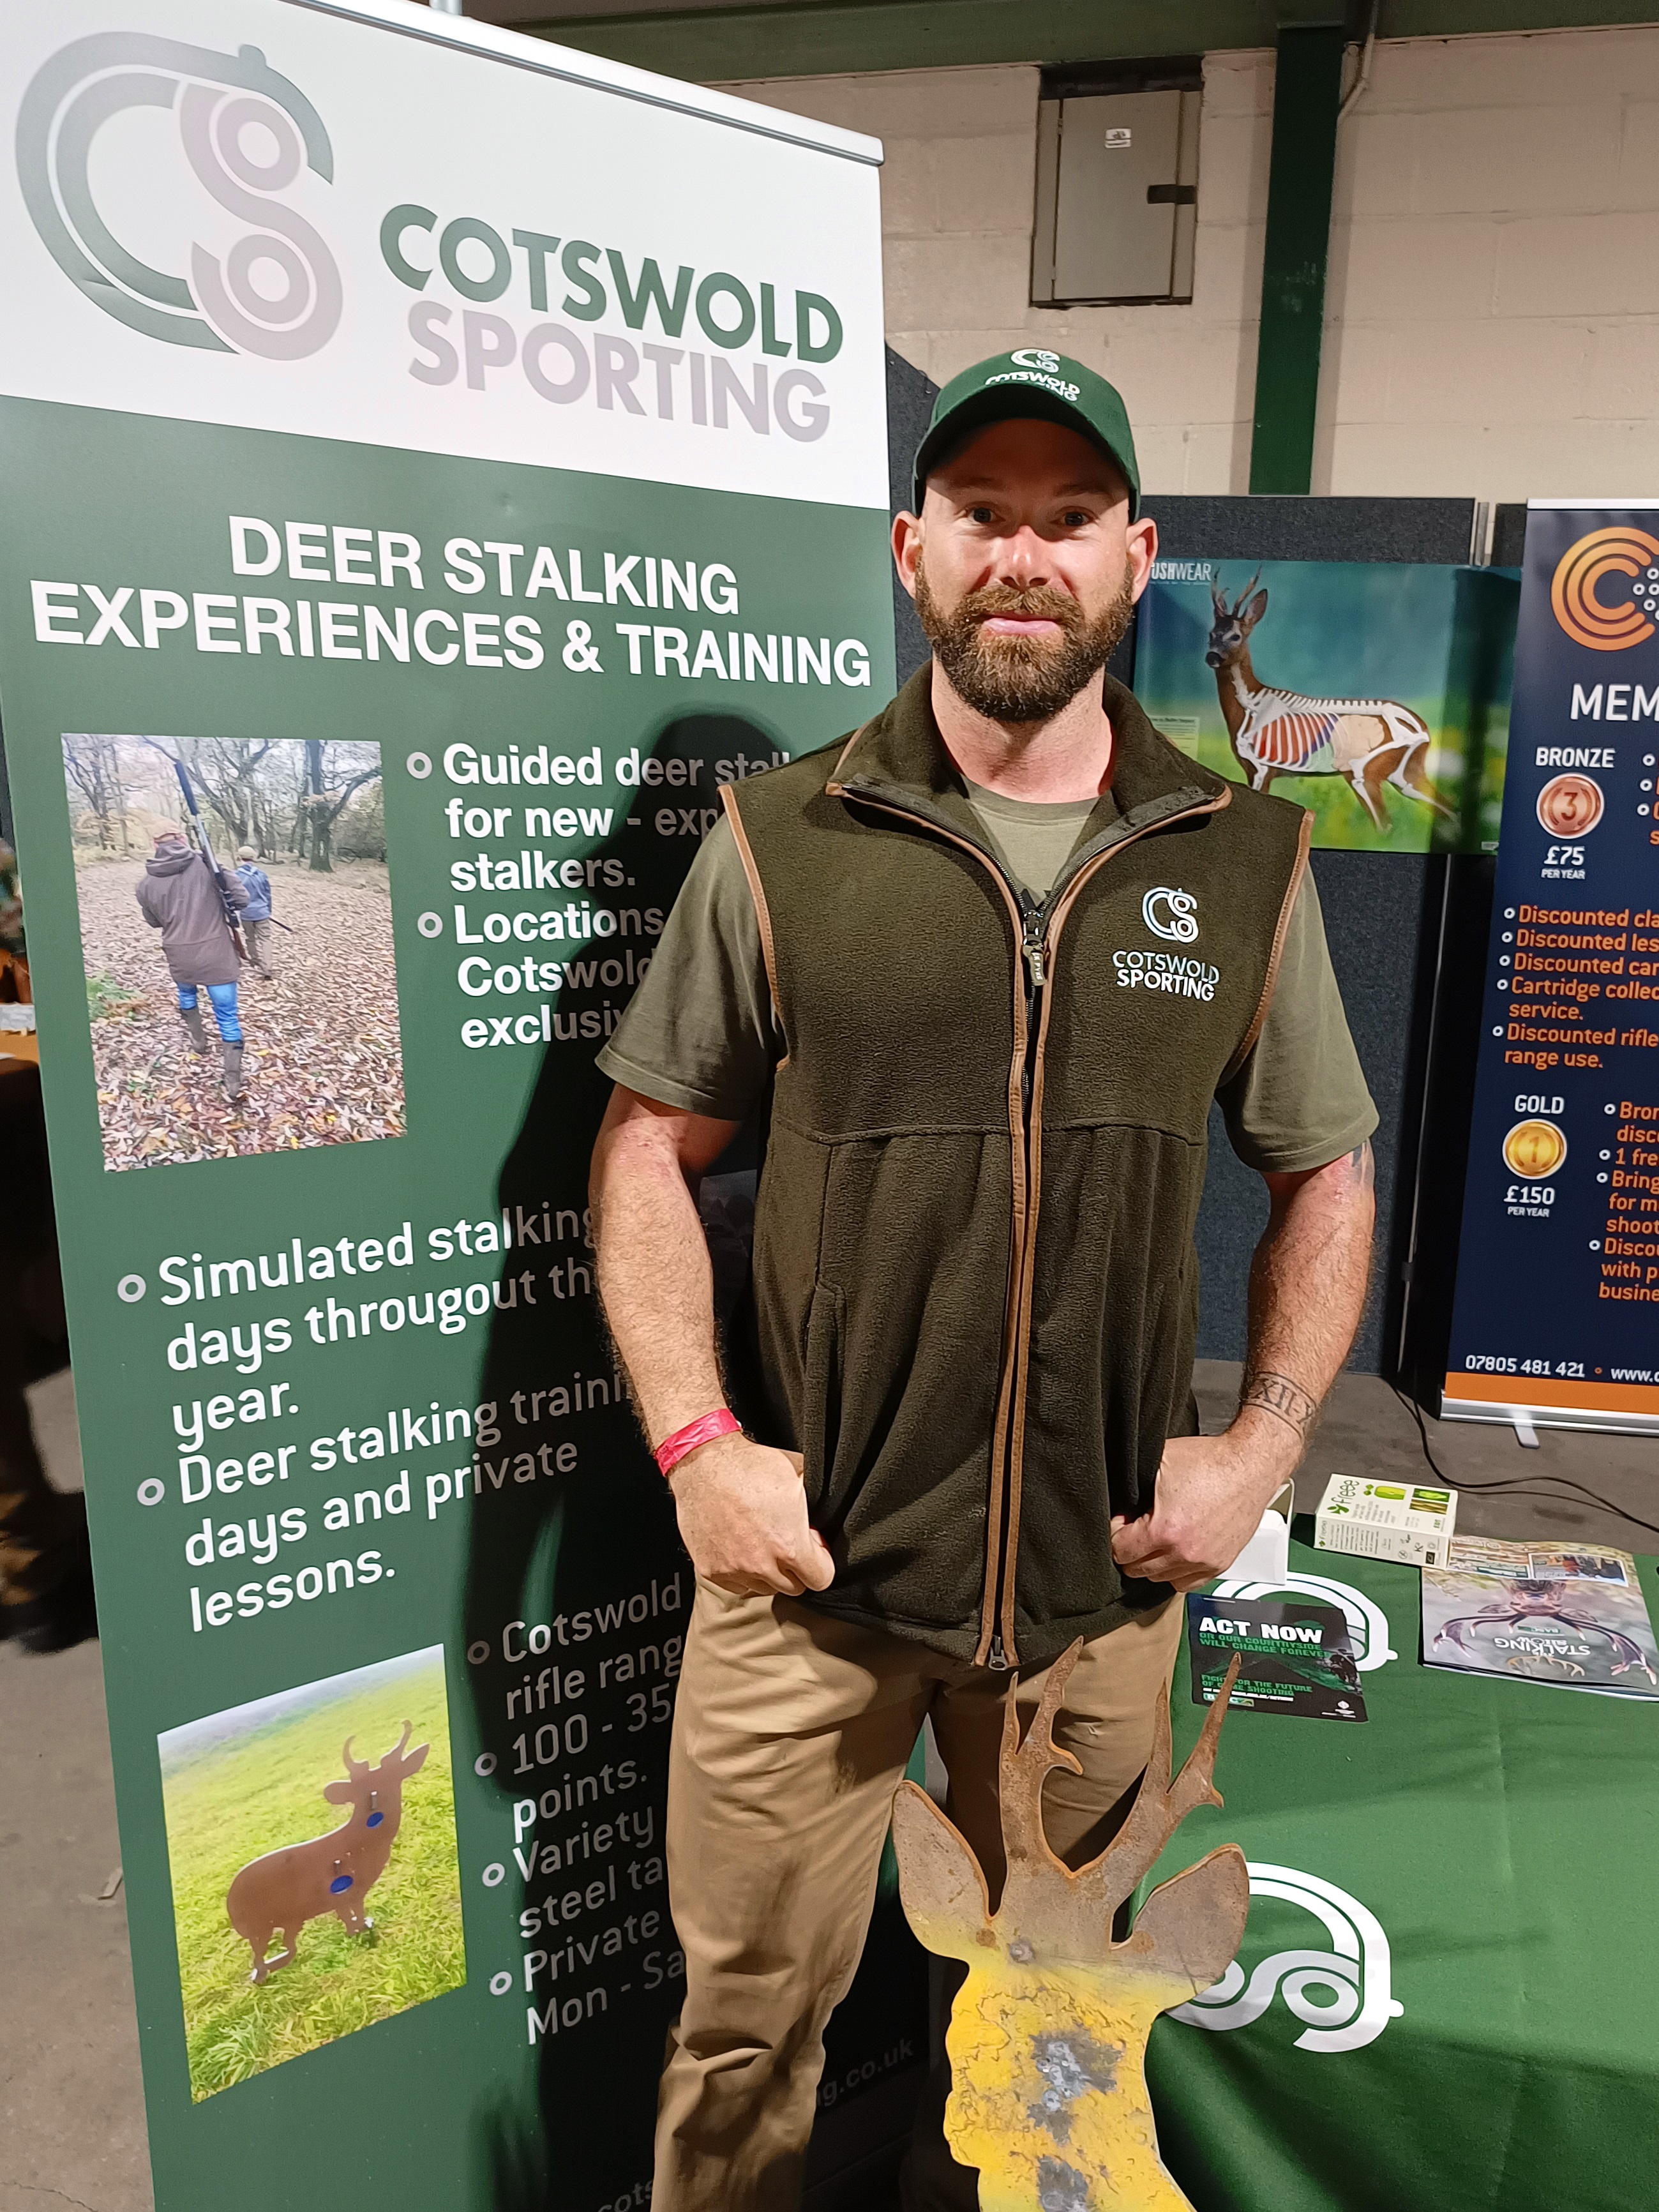 Cotswold Sporting